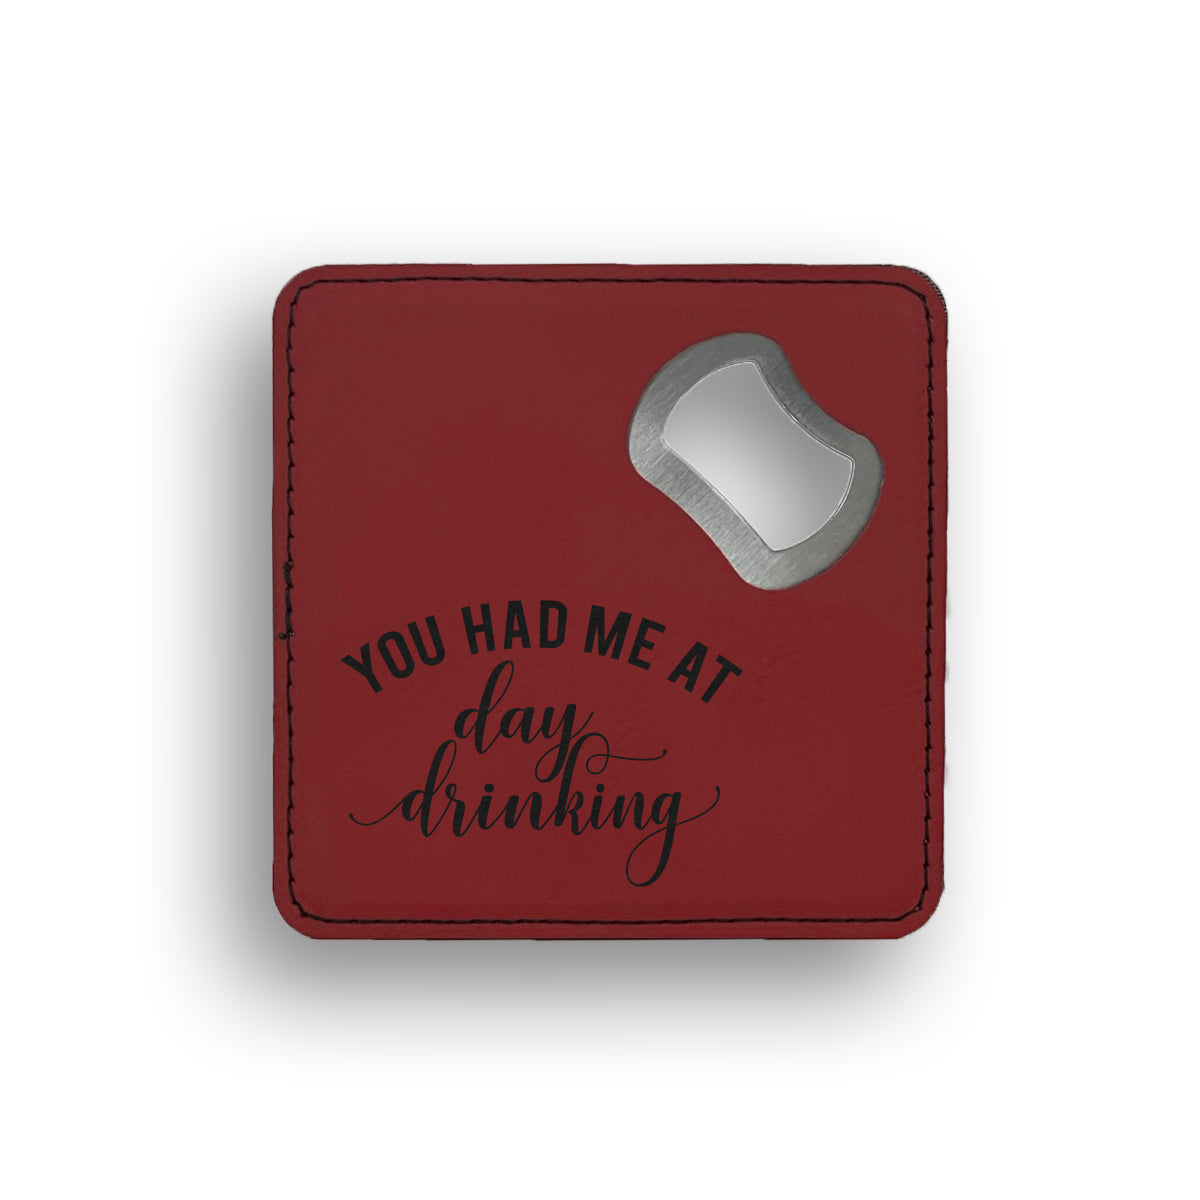 You Had Me At Day Bottle Opener Coaster